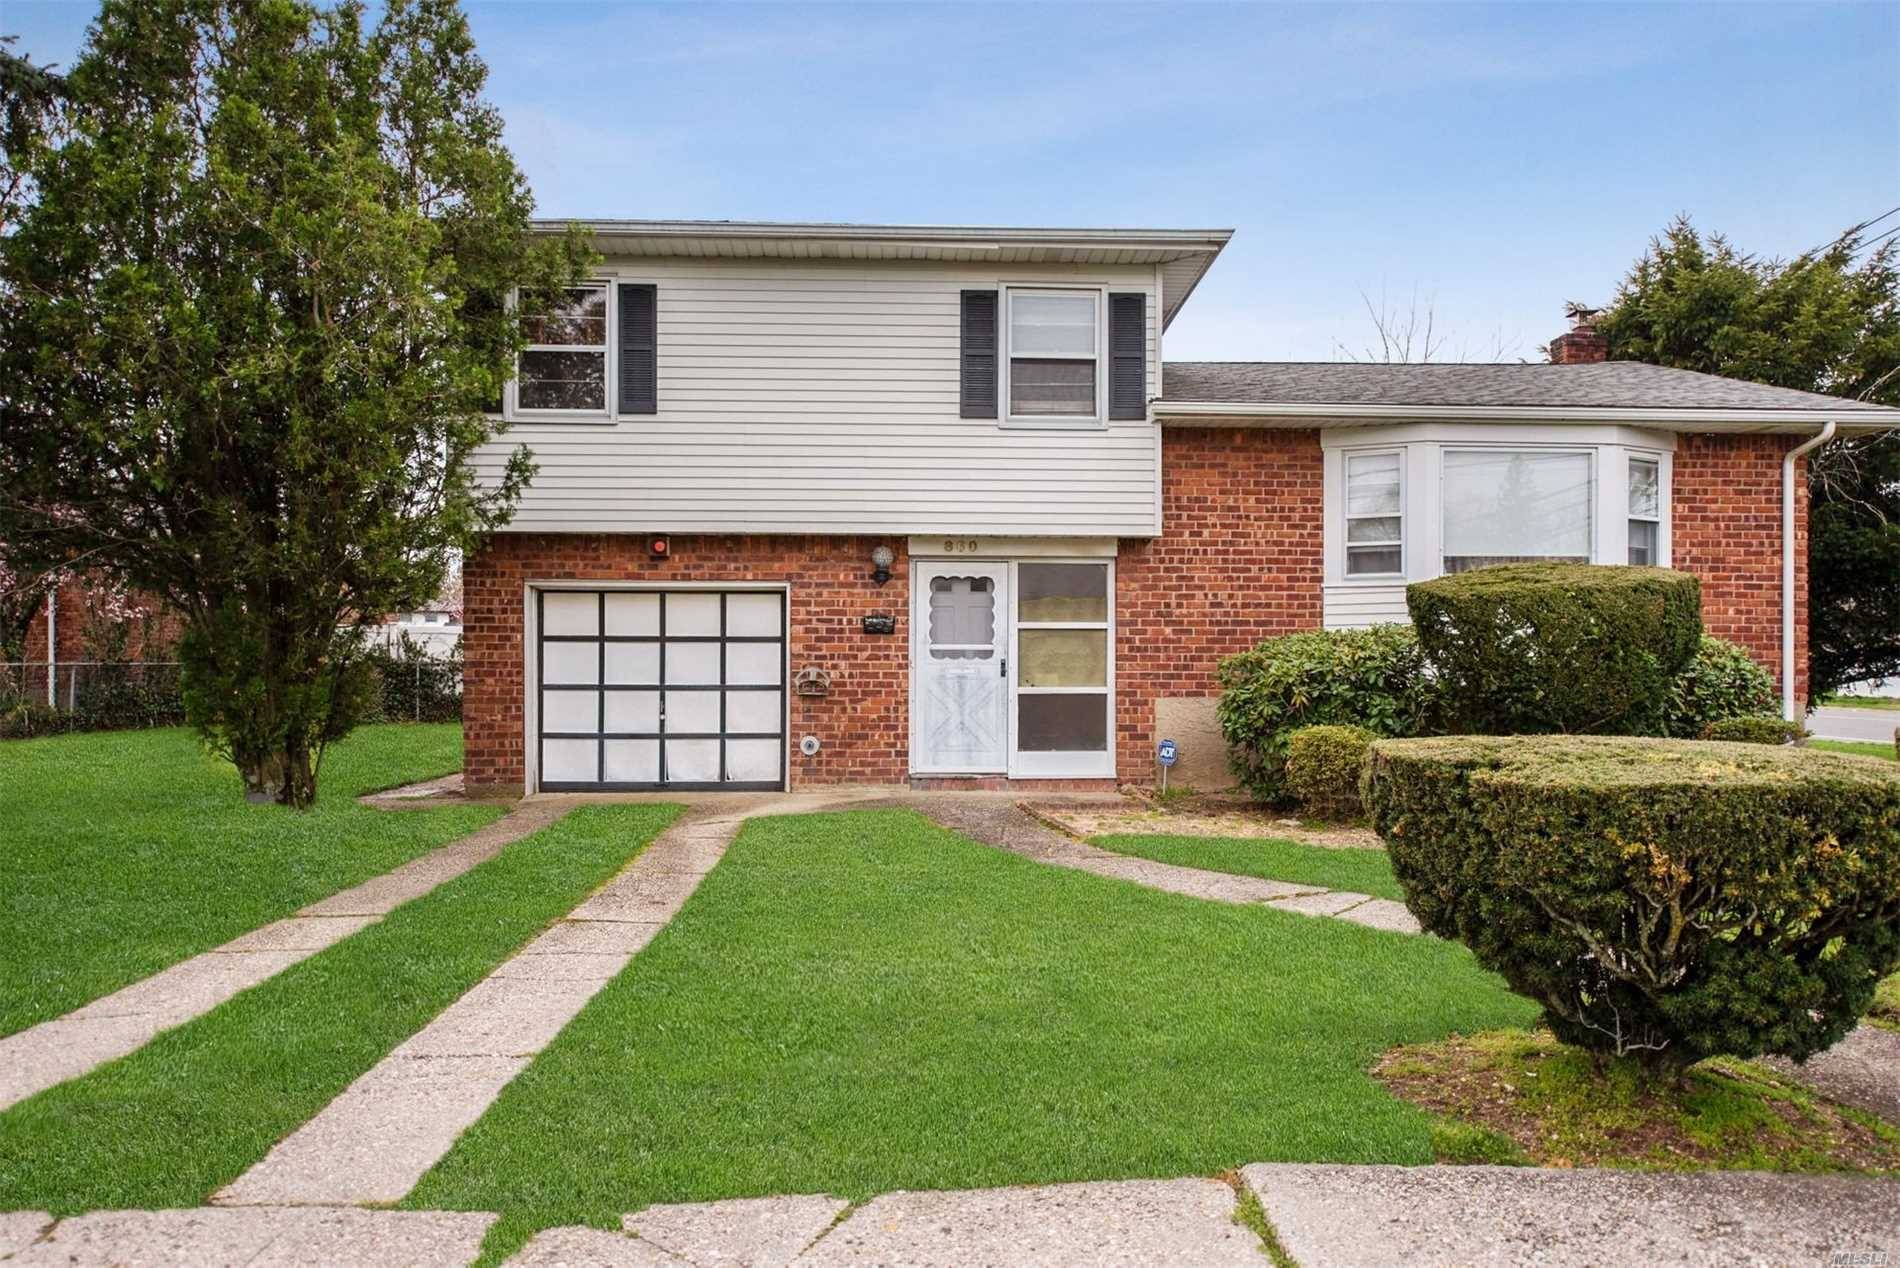 Home awaits on a cul de sac in North Bellmore !